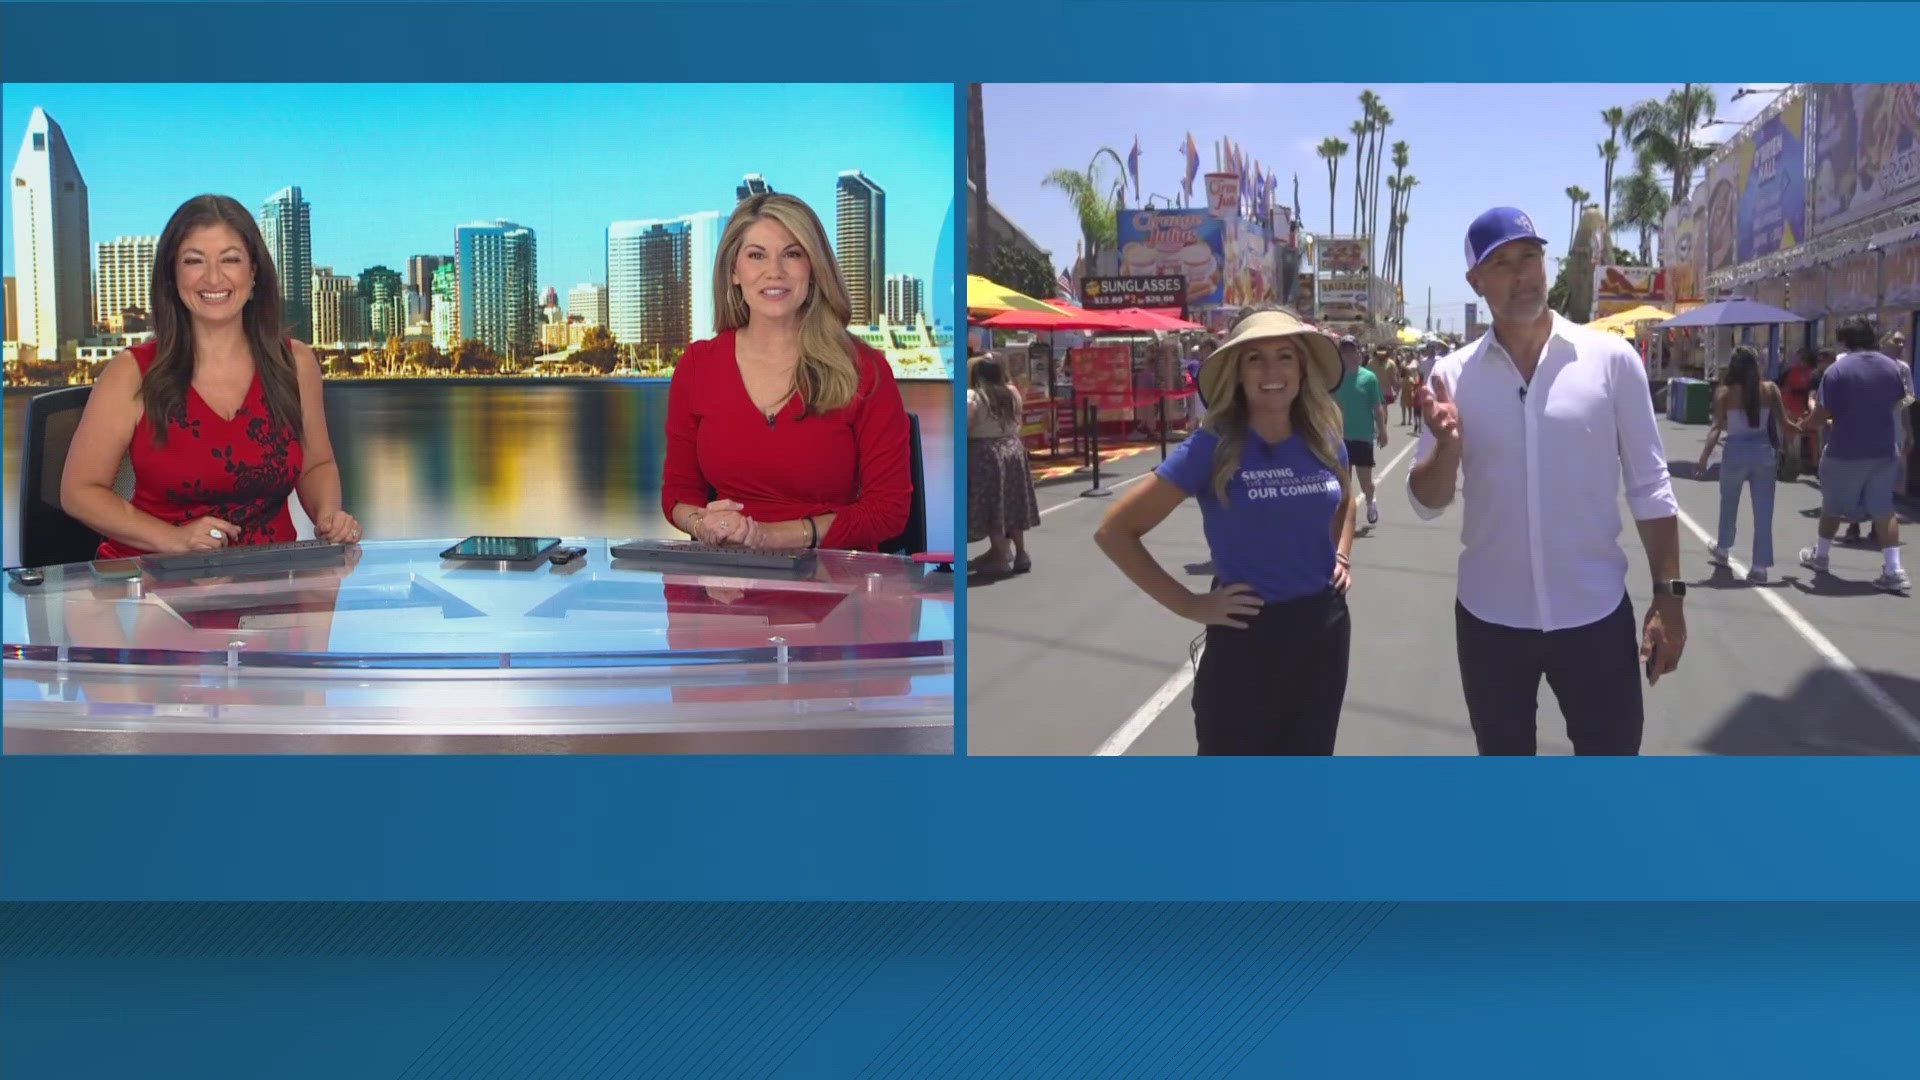 CBS 8 anchors Carlo Cecchetto and Anna Laurel are taking over the San Diego County Fair.